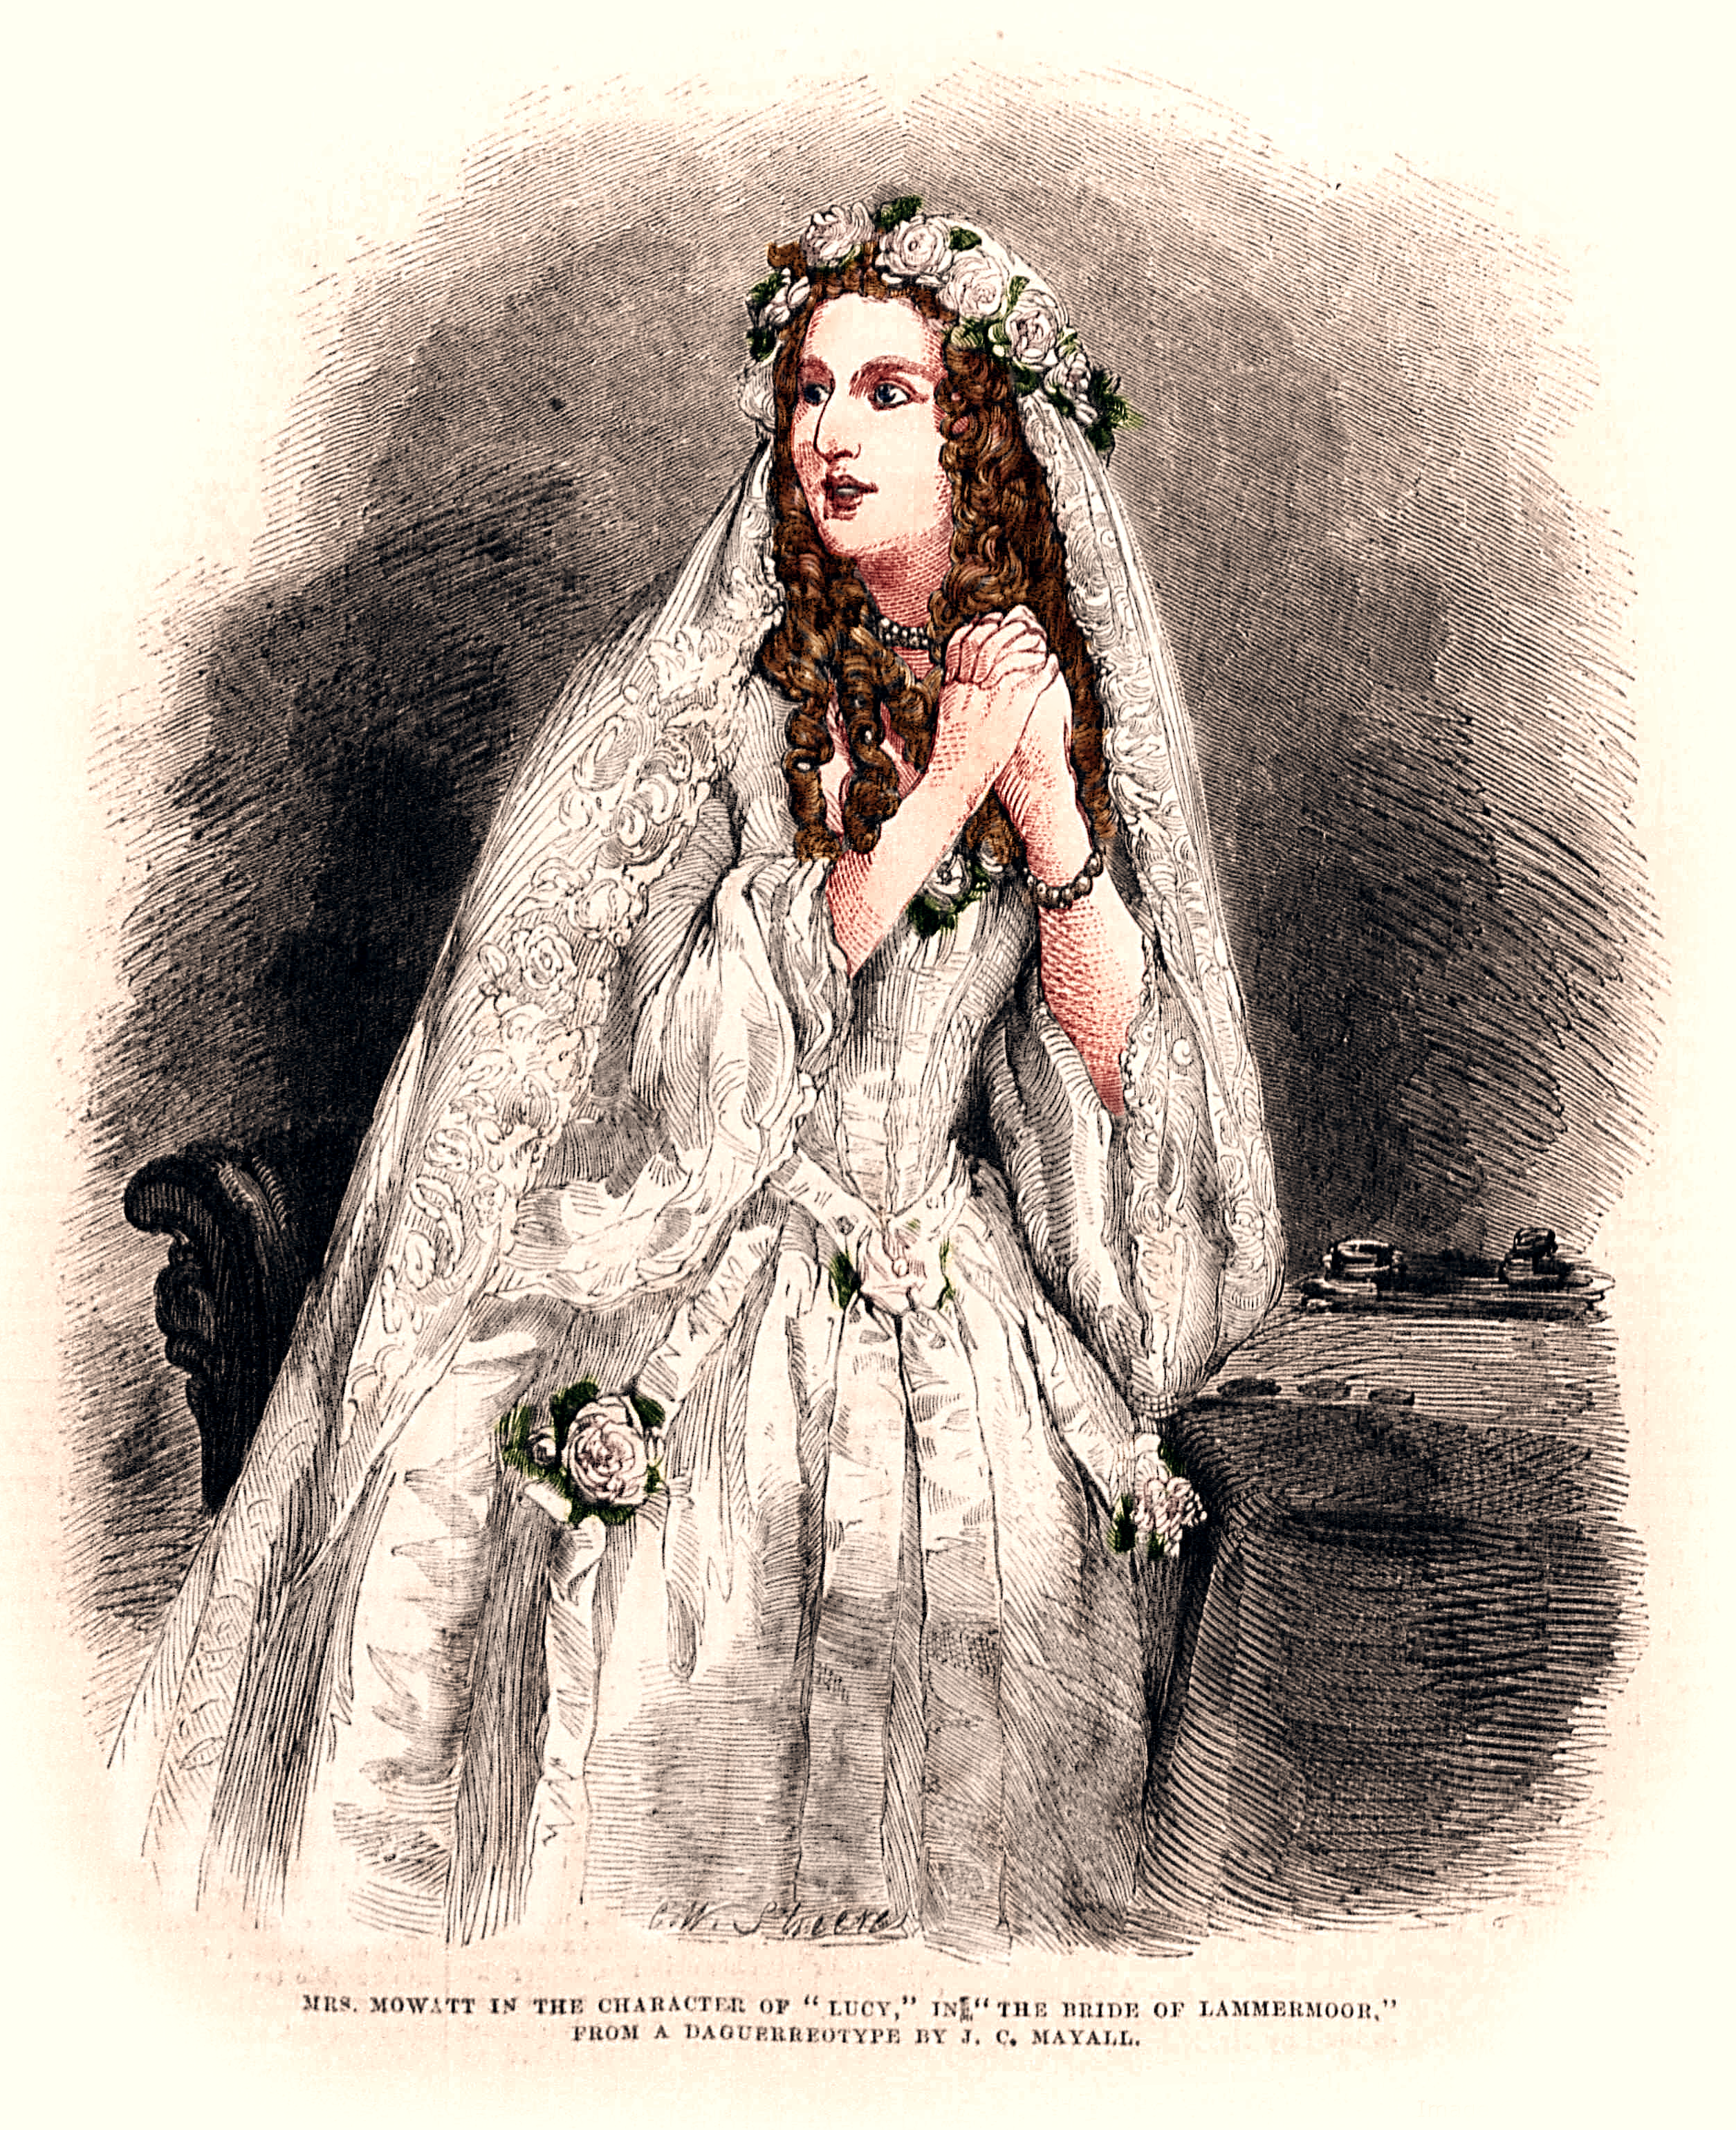 Illustration of Anna Cora Mowatt from The Lady's Own Newspaper